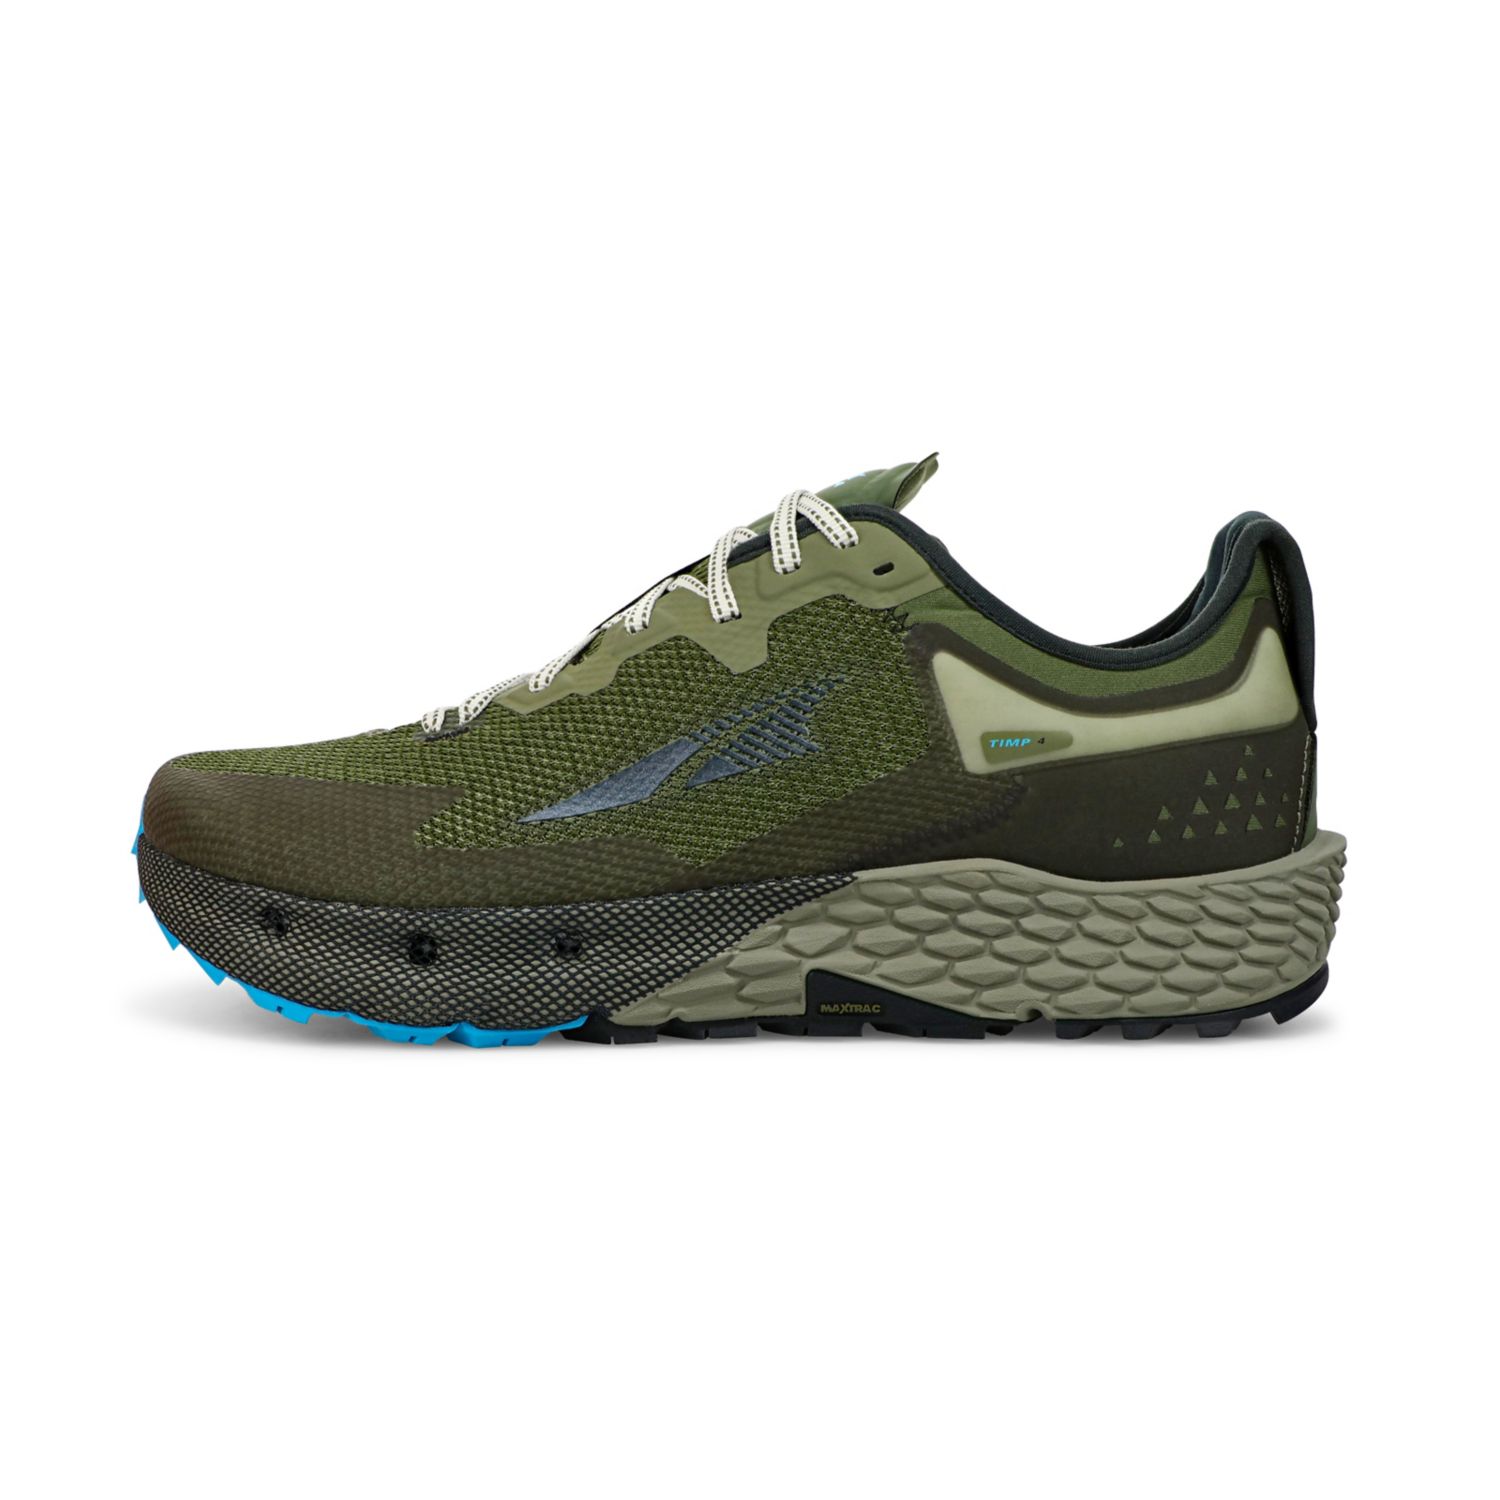 Olive Altra Timp 4 Men's Trail Running Shoes | Ireland-52618349